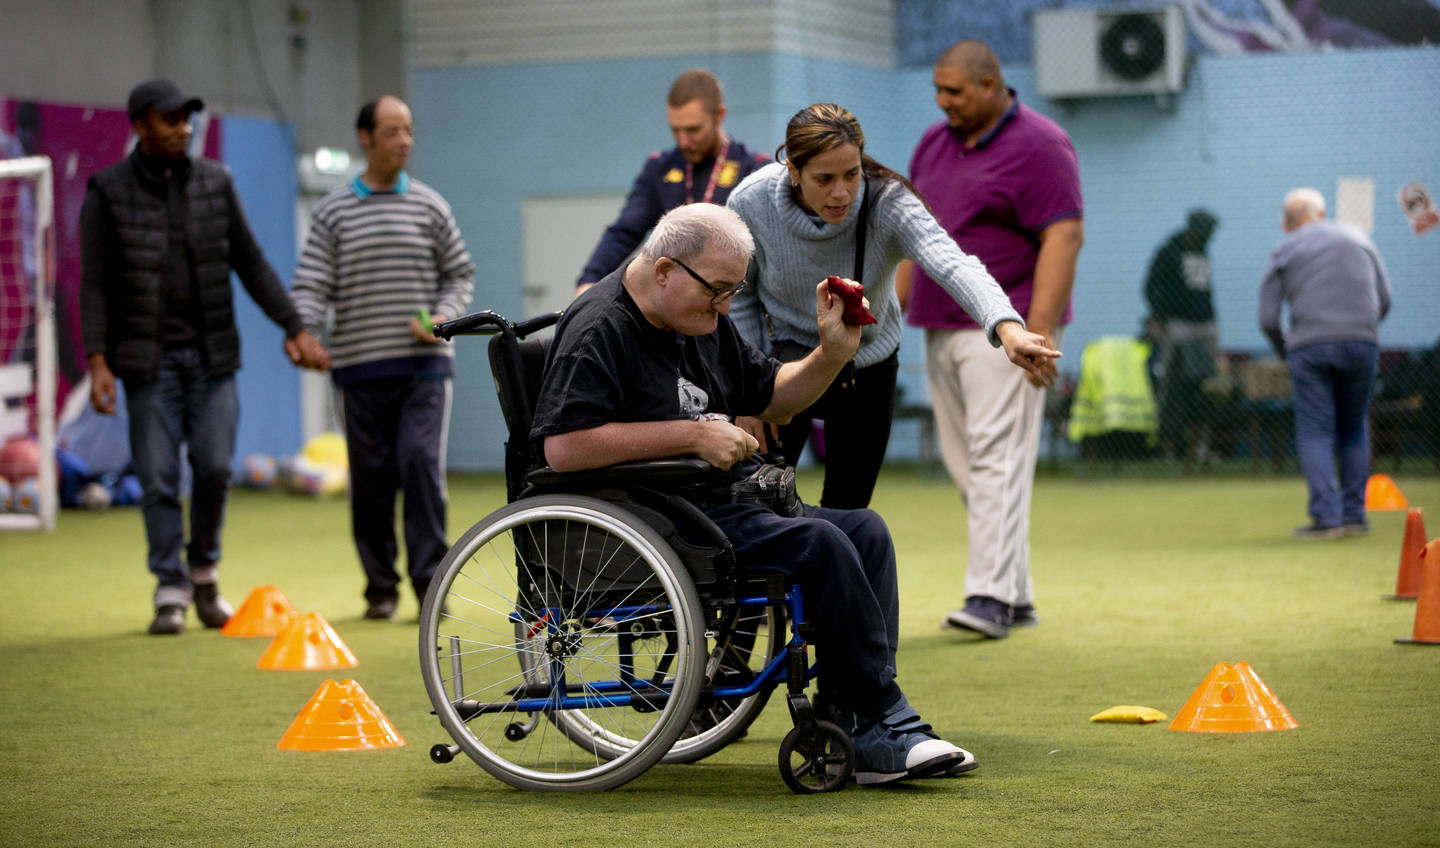 Disabled people taking part in bean bag games at Aston Villa inclusion session